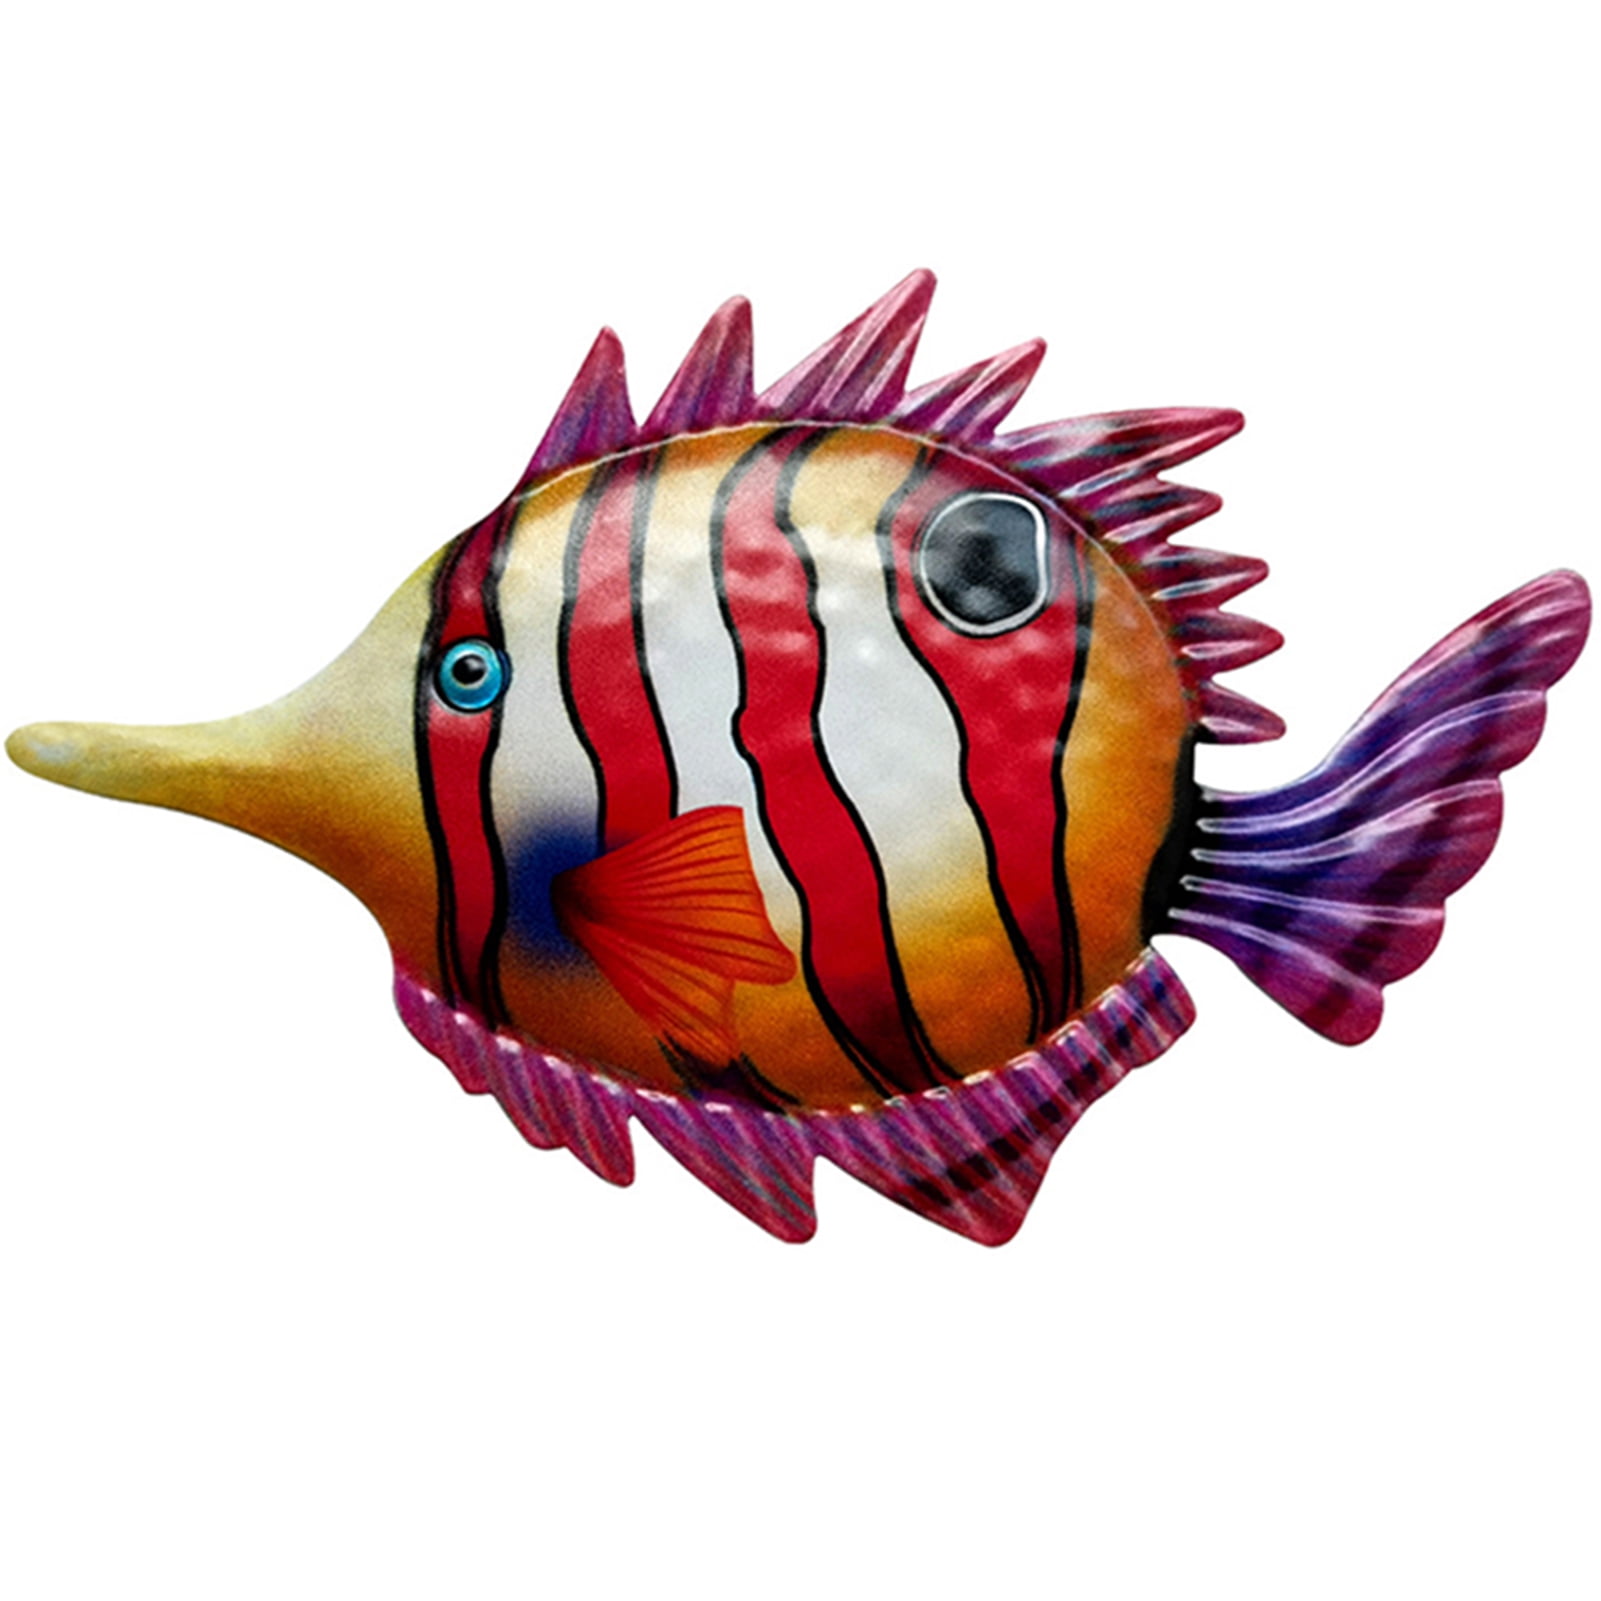 LIFFY Metal Fish Wall Art Bathroom Glass Nautical Decor Outdoor Tropical Clownfish Hanging Decorations for Pool or Patio 